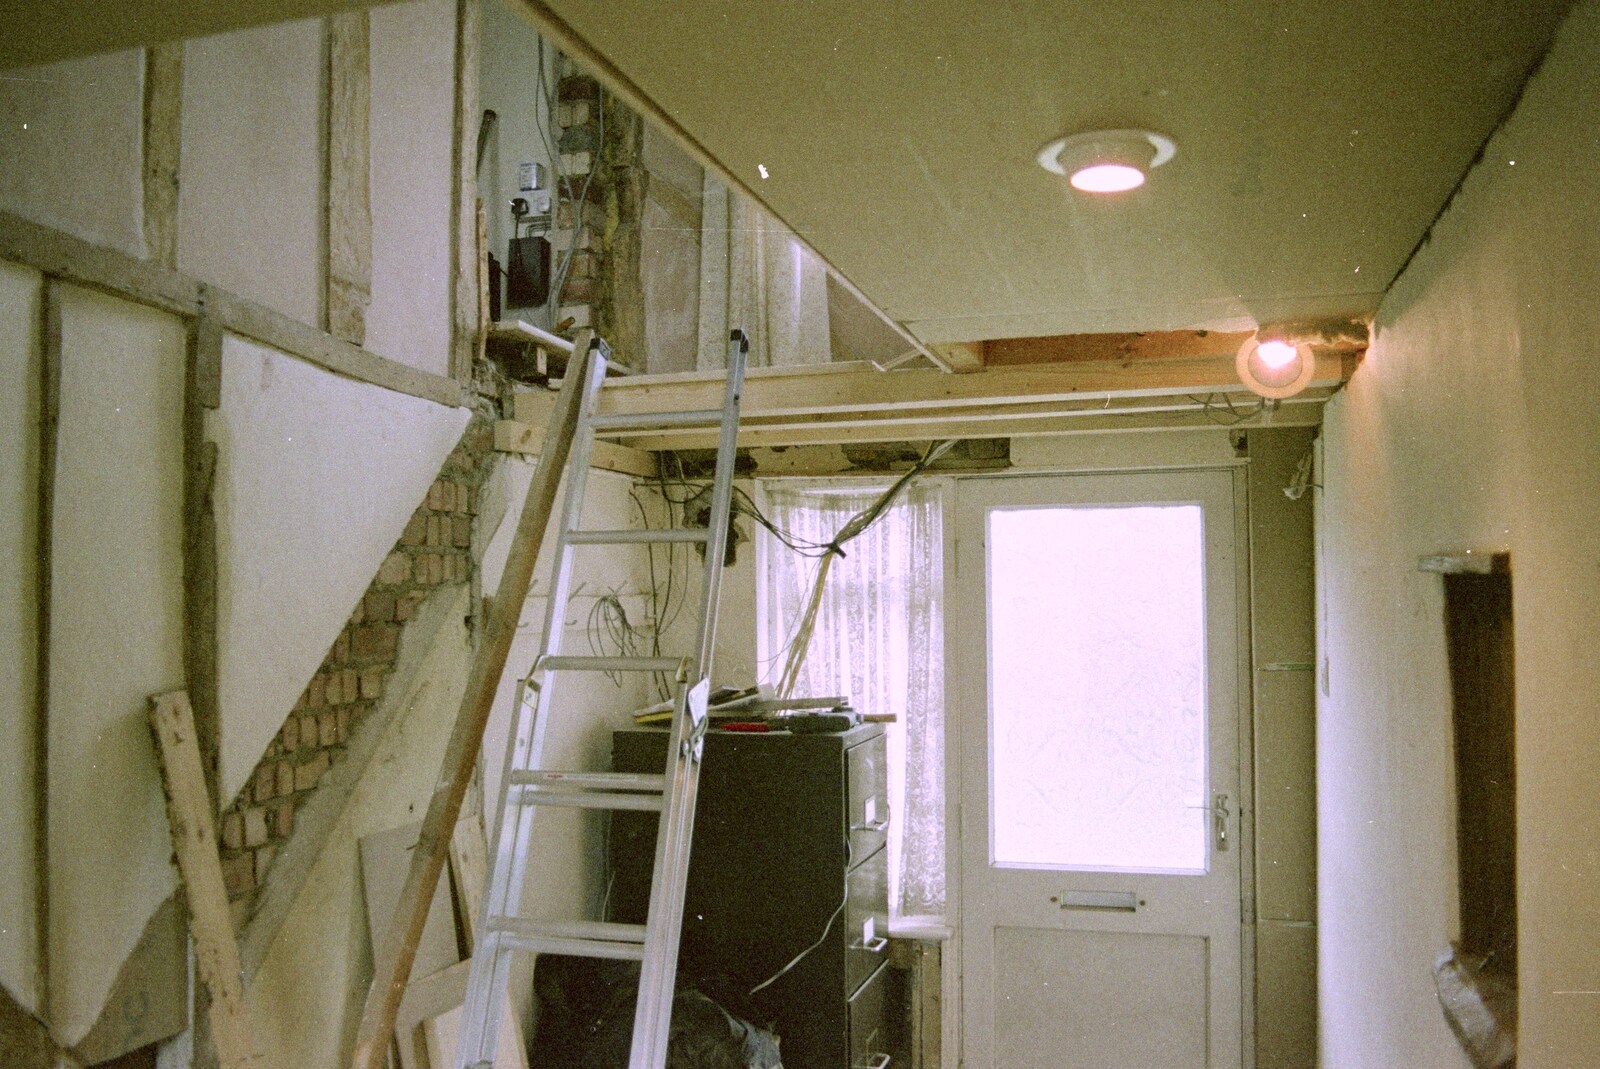 A step ladder services the upstairs from 3G Lab, and Building a Staircase, Brome, Suffolk - 11th February 2001